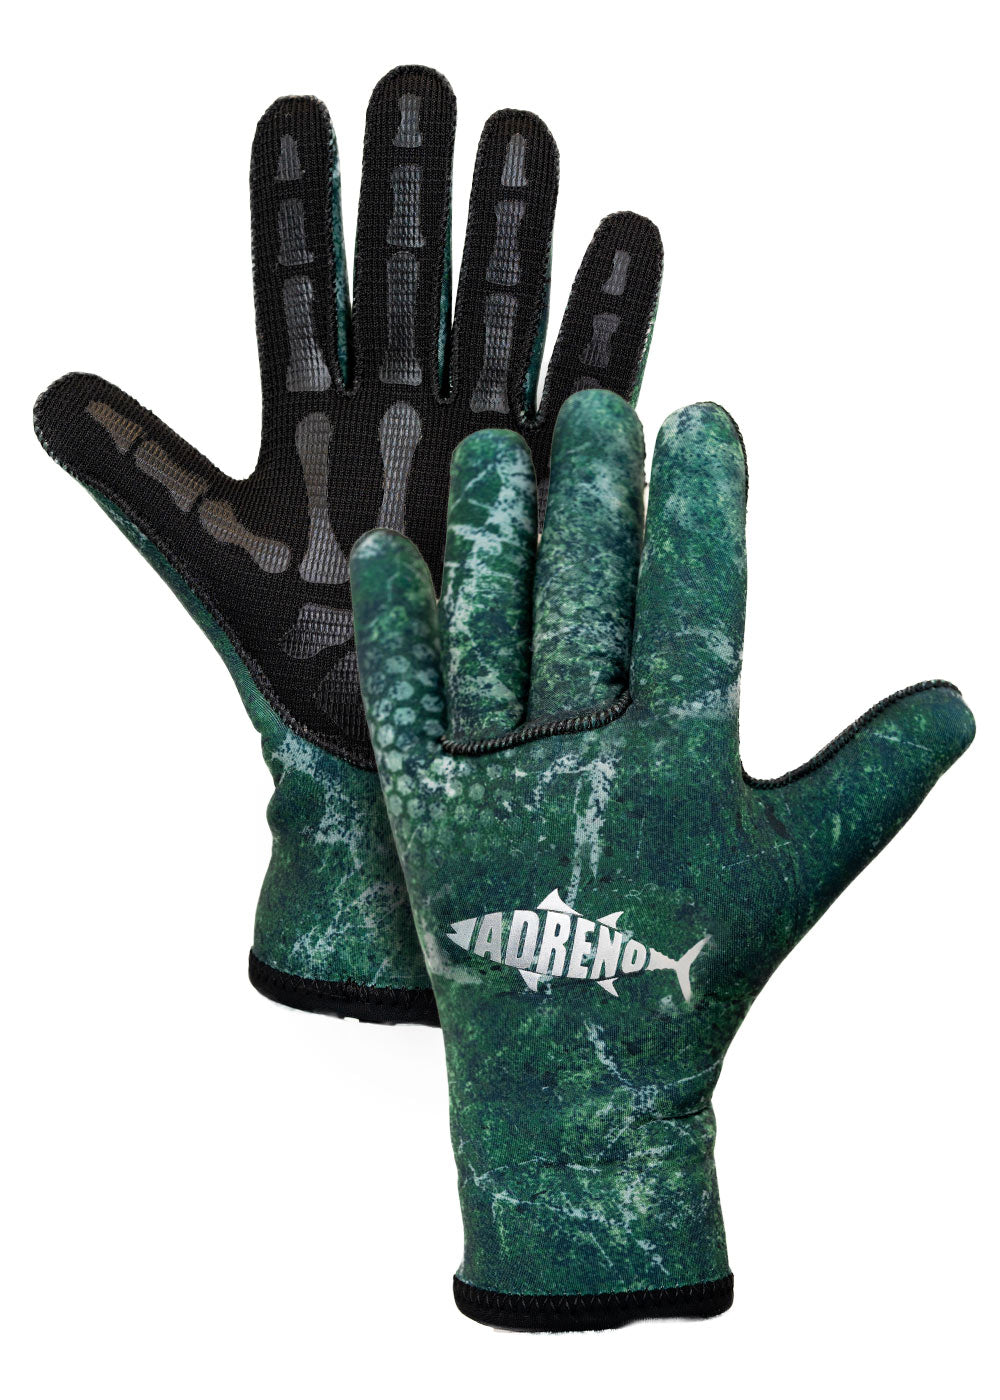 Adreno Abrolhos 3.0mm Diving Gloves - Adreno - Ocean Outfitters